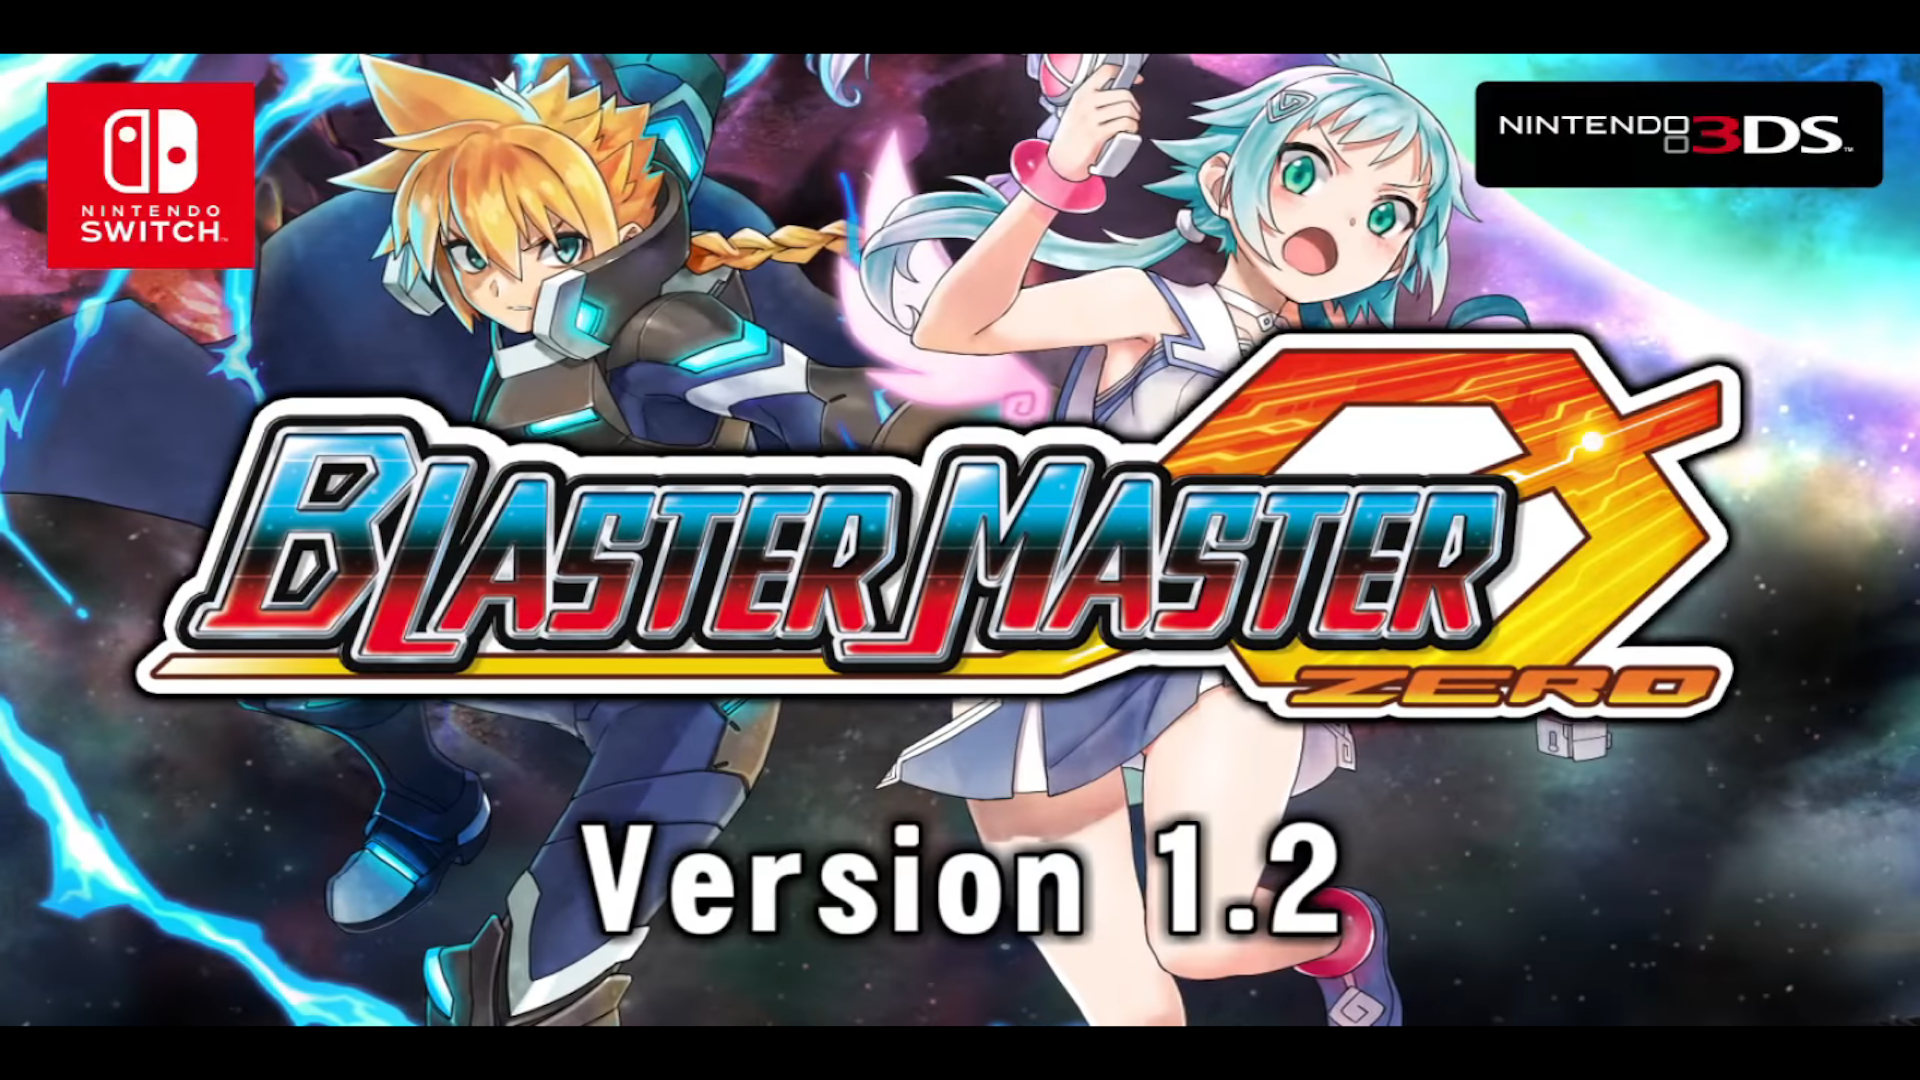 BLASTER MASTER ZERO Gets Free DLC Characters And A New Game Mode In 1.2 Update — GameTyrant